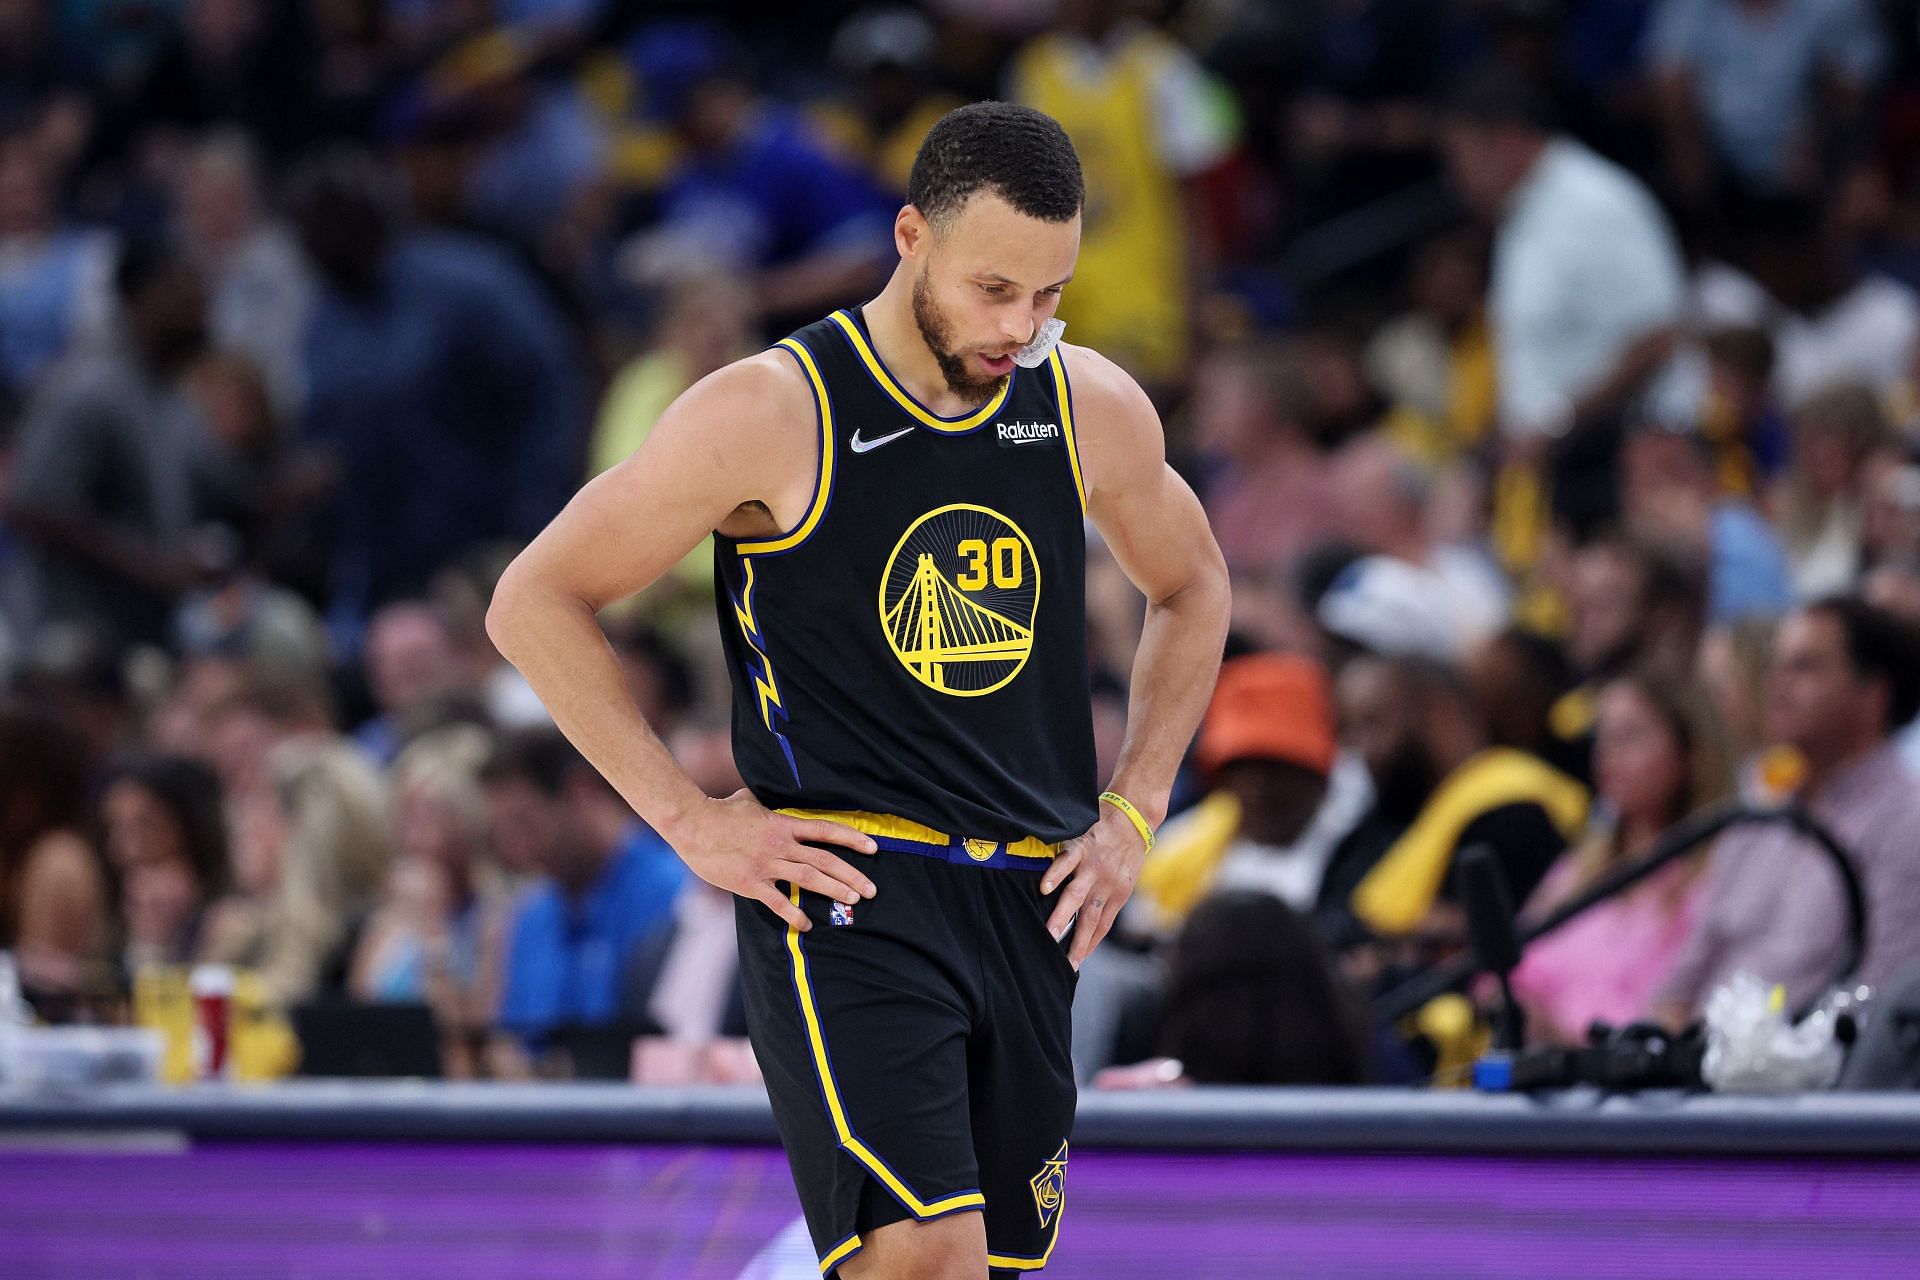 Steph Curry #30 of the Golden State Warriors reacts against the Memphis Grizzlies during the third quarter in Game Five of the 2022 NBA Playoffs Western Conference Semifinals at FedExForum on May 11, 2022 in Memphis, Tennessee.